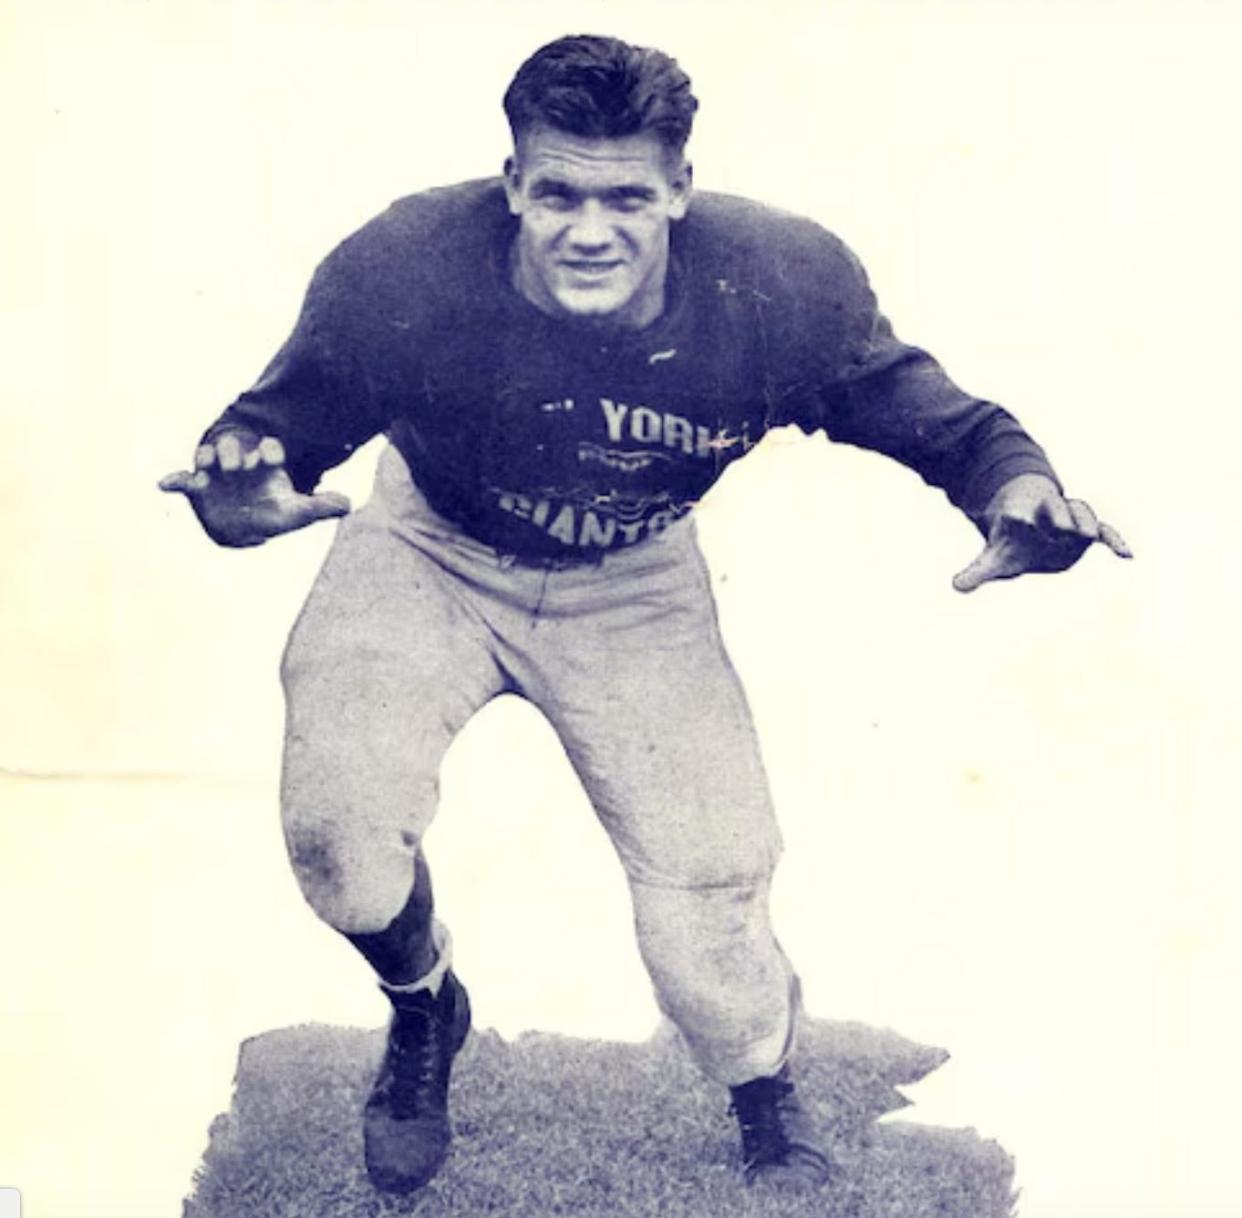 One of the best-known players to die in combat was New York Giants tackle Al Blozis, killed by machine gun fire as he searched for missing members of his platoon in France. Lt. Blozis was killed just six weeks after playing in the 1944 NFL Championship Game.